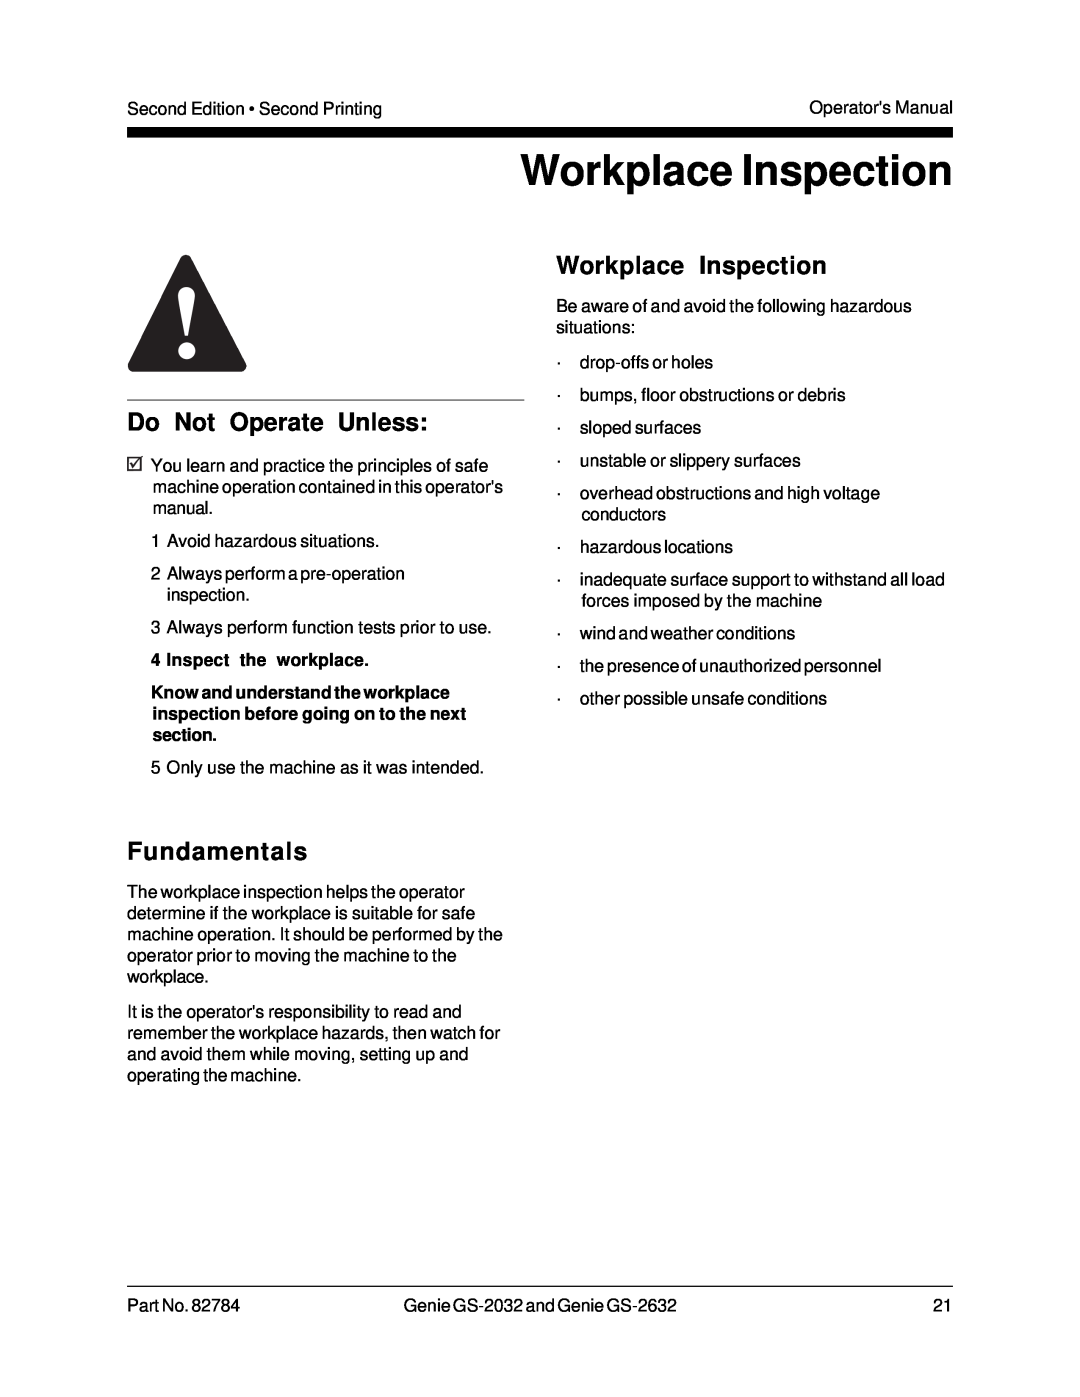 Genie GS-2632, CE, 82784, GS-2032 manual Workplace Inspection, 4Inspect the workplace, Do Not Operate Unless, Fundamentals 